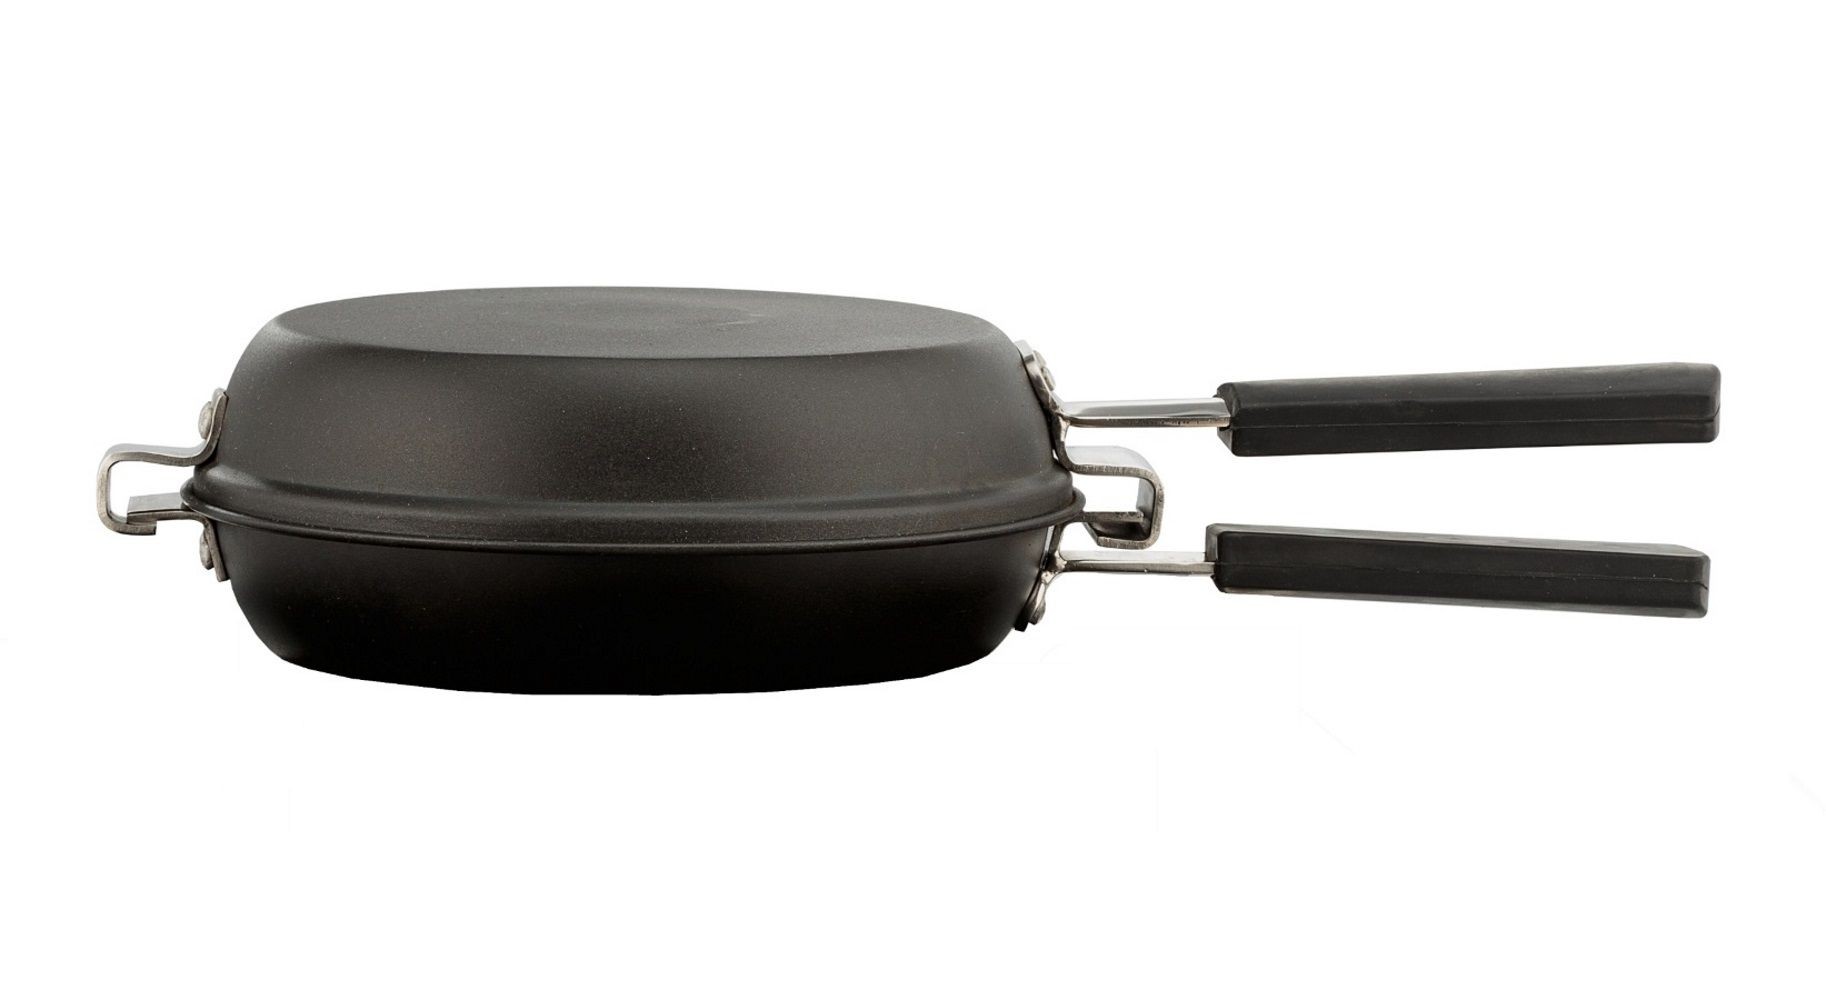 https://www.lionsdeal.com/itempics/Bon-Chef-61274-One-Minute-Non-Stick-Omelet-Pan-with-Handle--8-5-8-quot--Dia--36025_xlarge.jpg